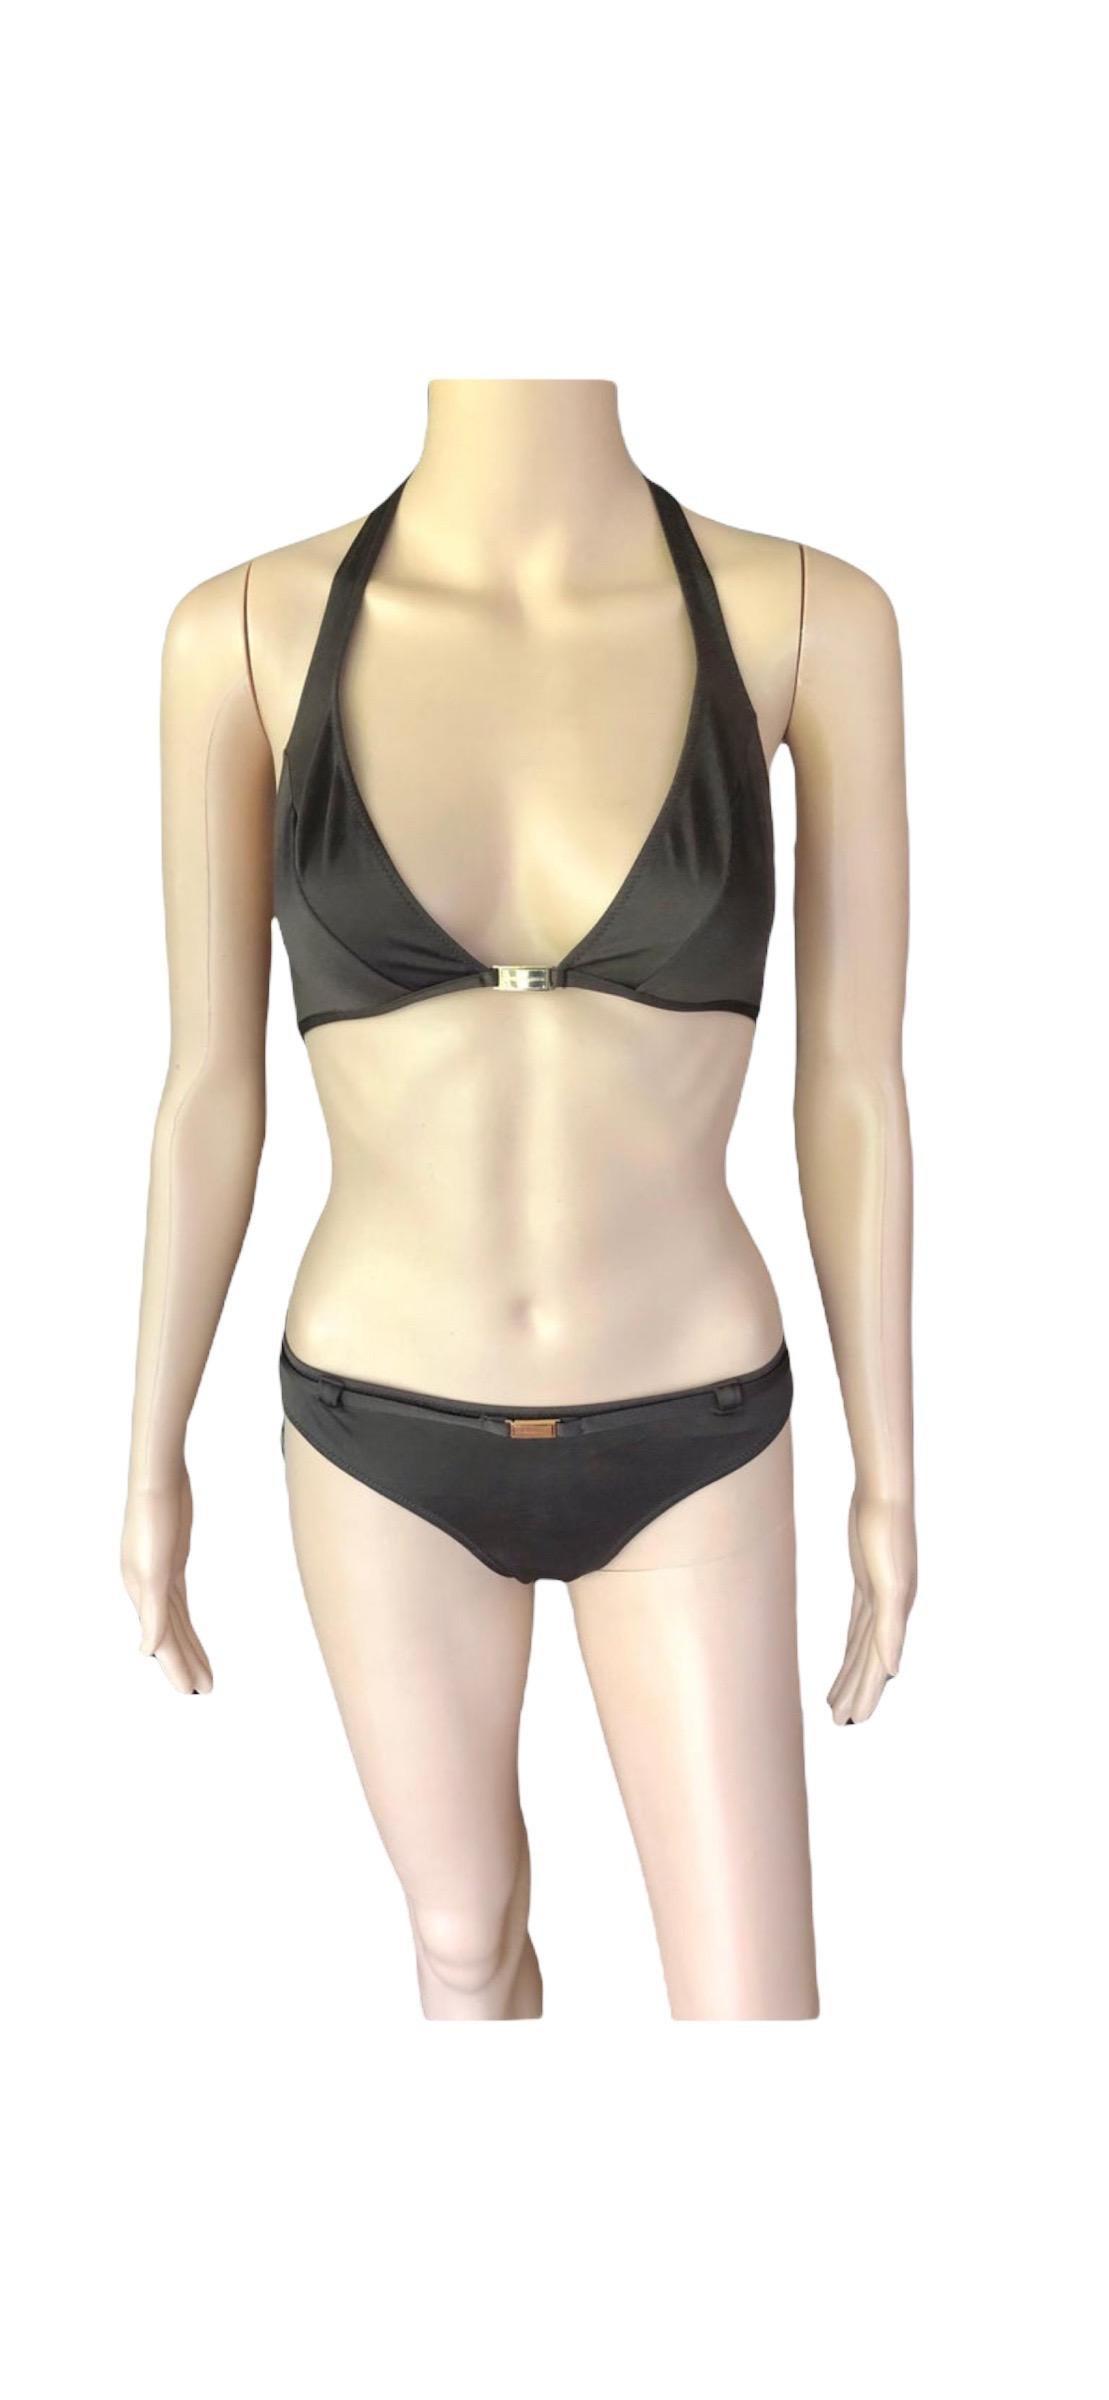 Dolce & Gabbana Logo Embellished Belted Brown Bikini Swimwear Swimsuit 2 Piece In Good Condition For Sale In Naples, FL